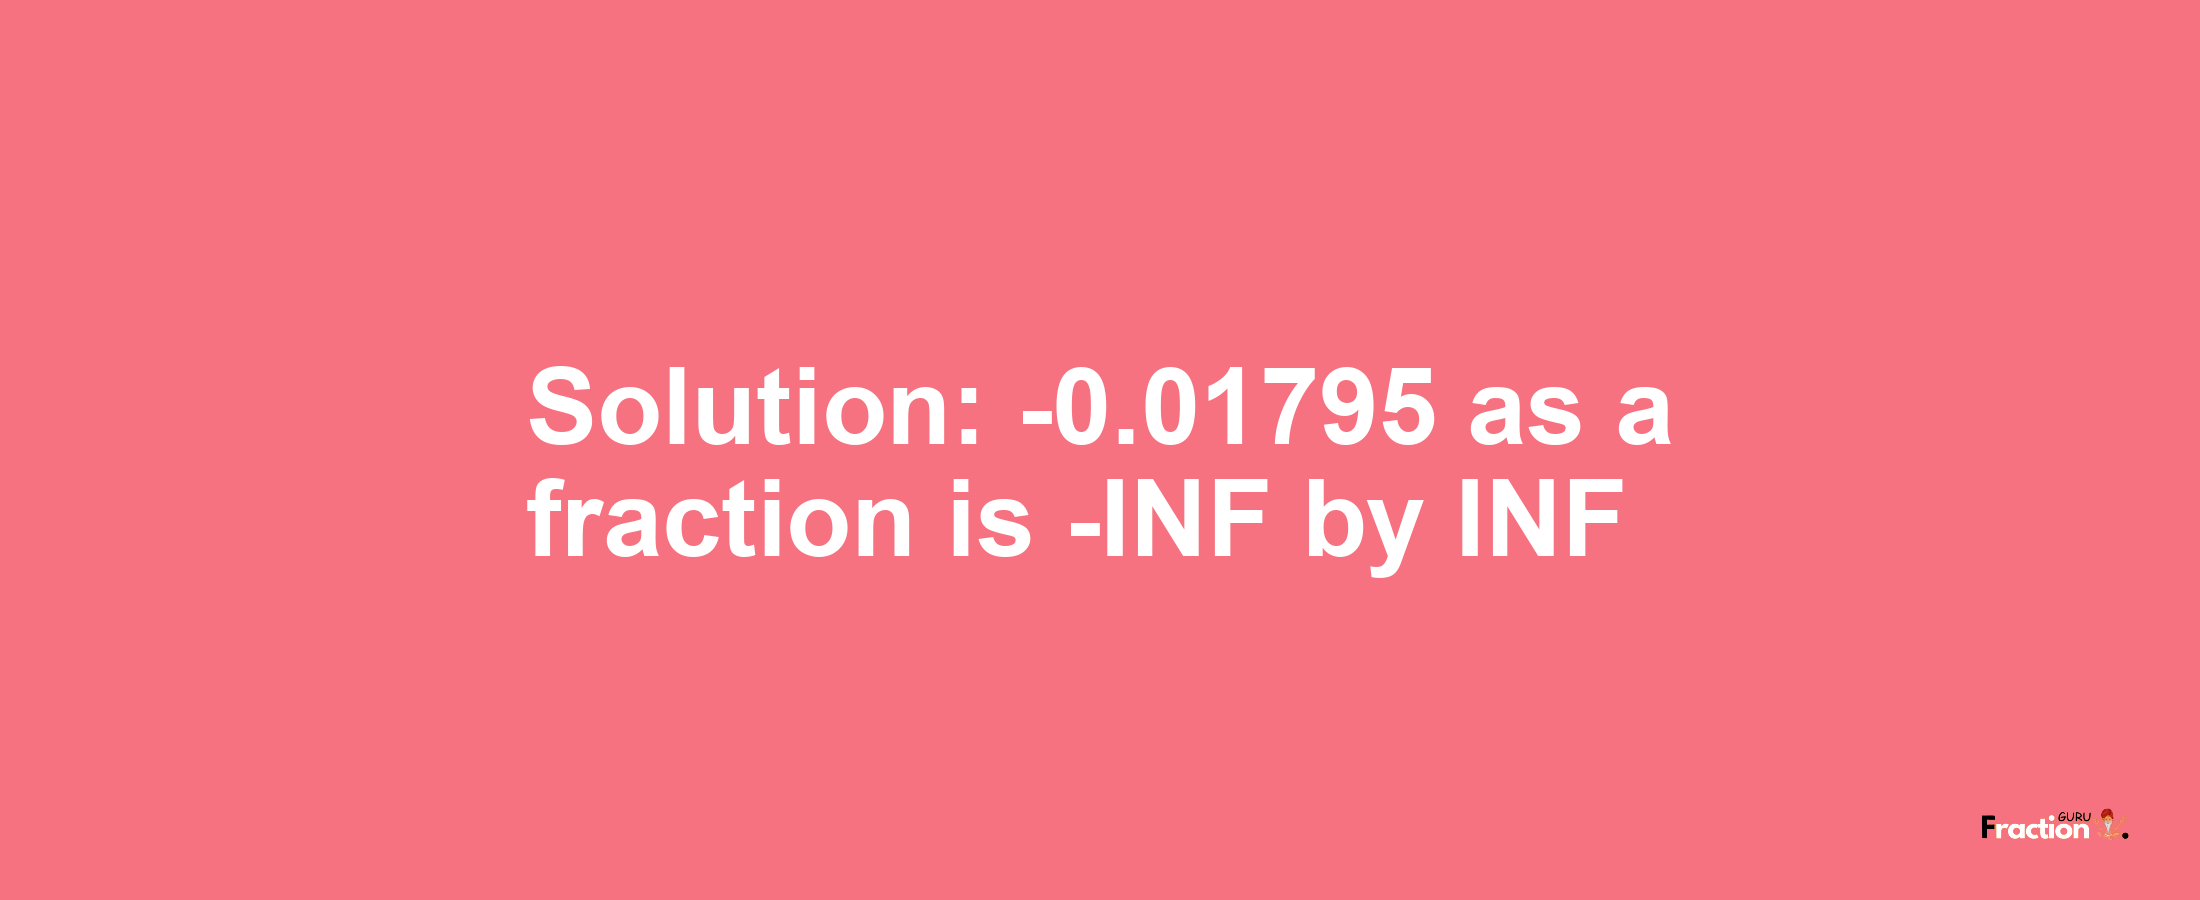 Solution:-0.01795 as a fraction is -INF/INF